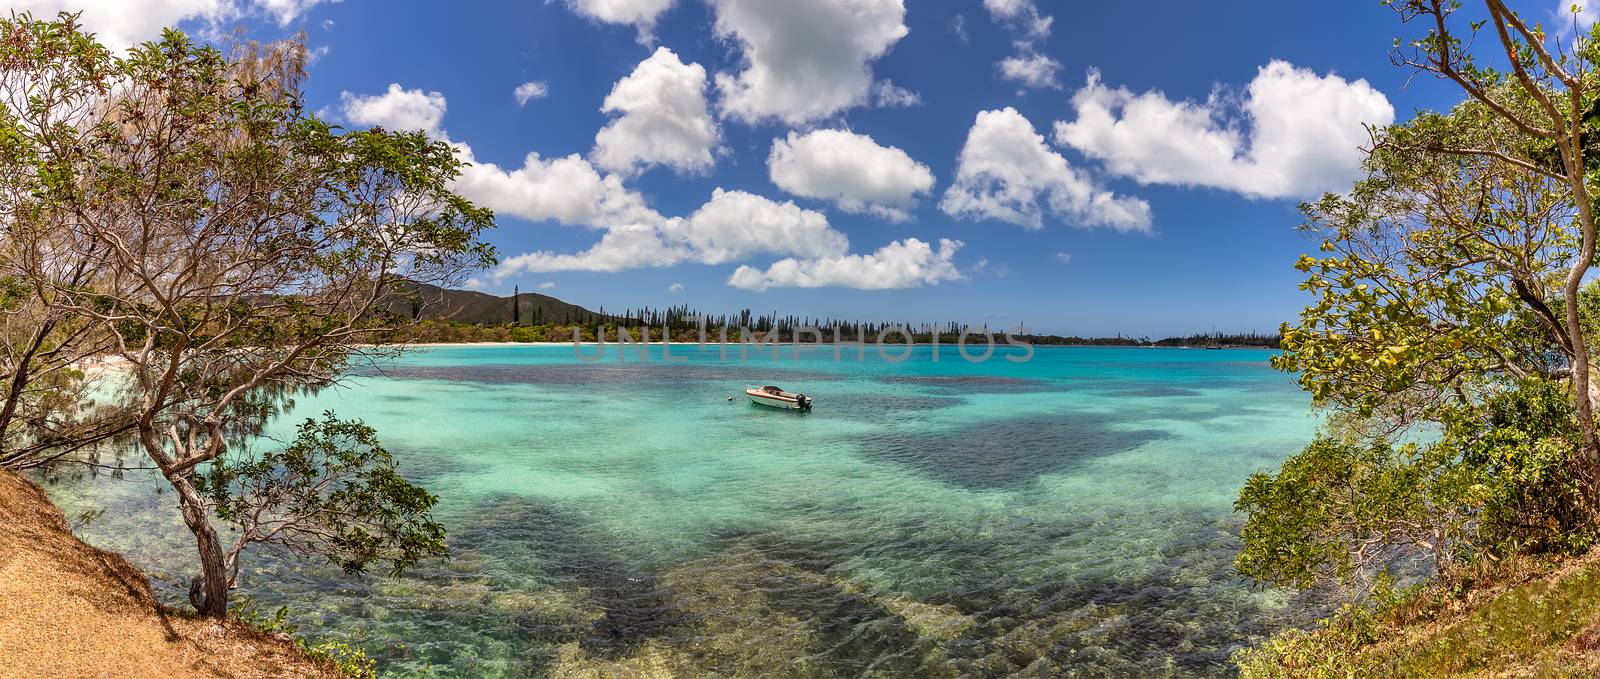 Amazing panoramic shot of Isle of Pines in New Caledonia. Beautiful turquoise water of the ocean with trees on the banks. Lone fishing boat anchored in the middle. Blue cloudy sky as a background by DamantisZ